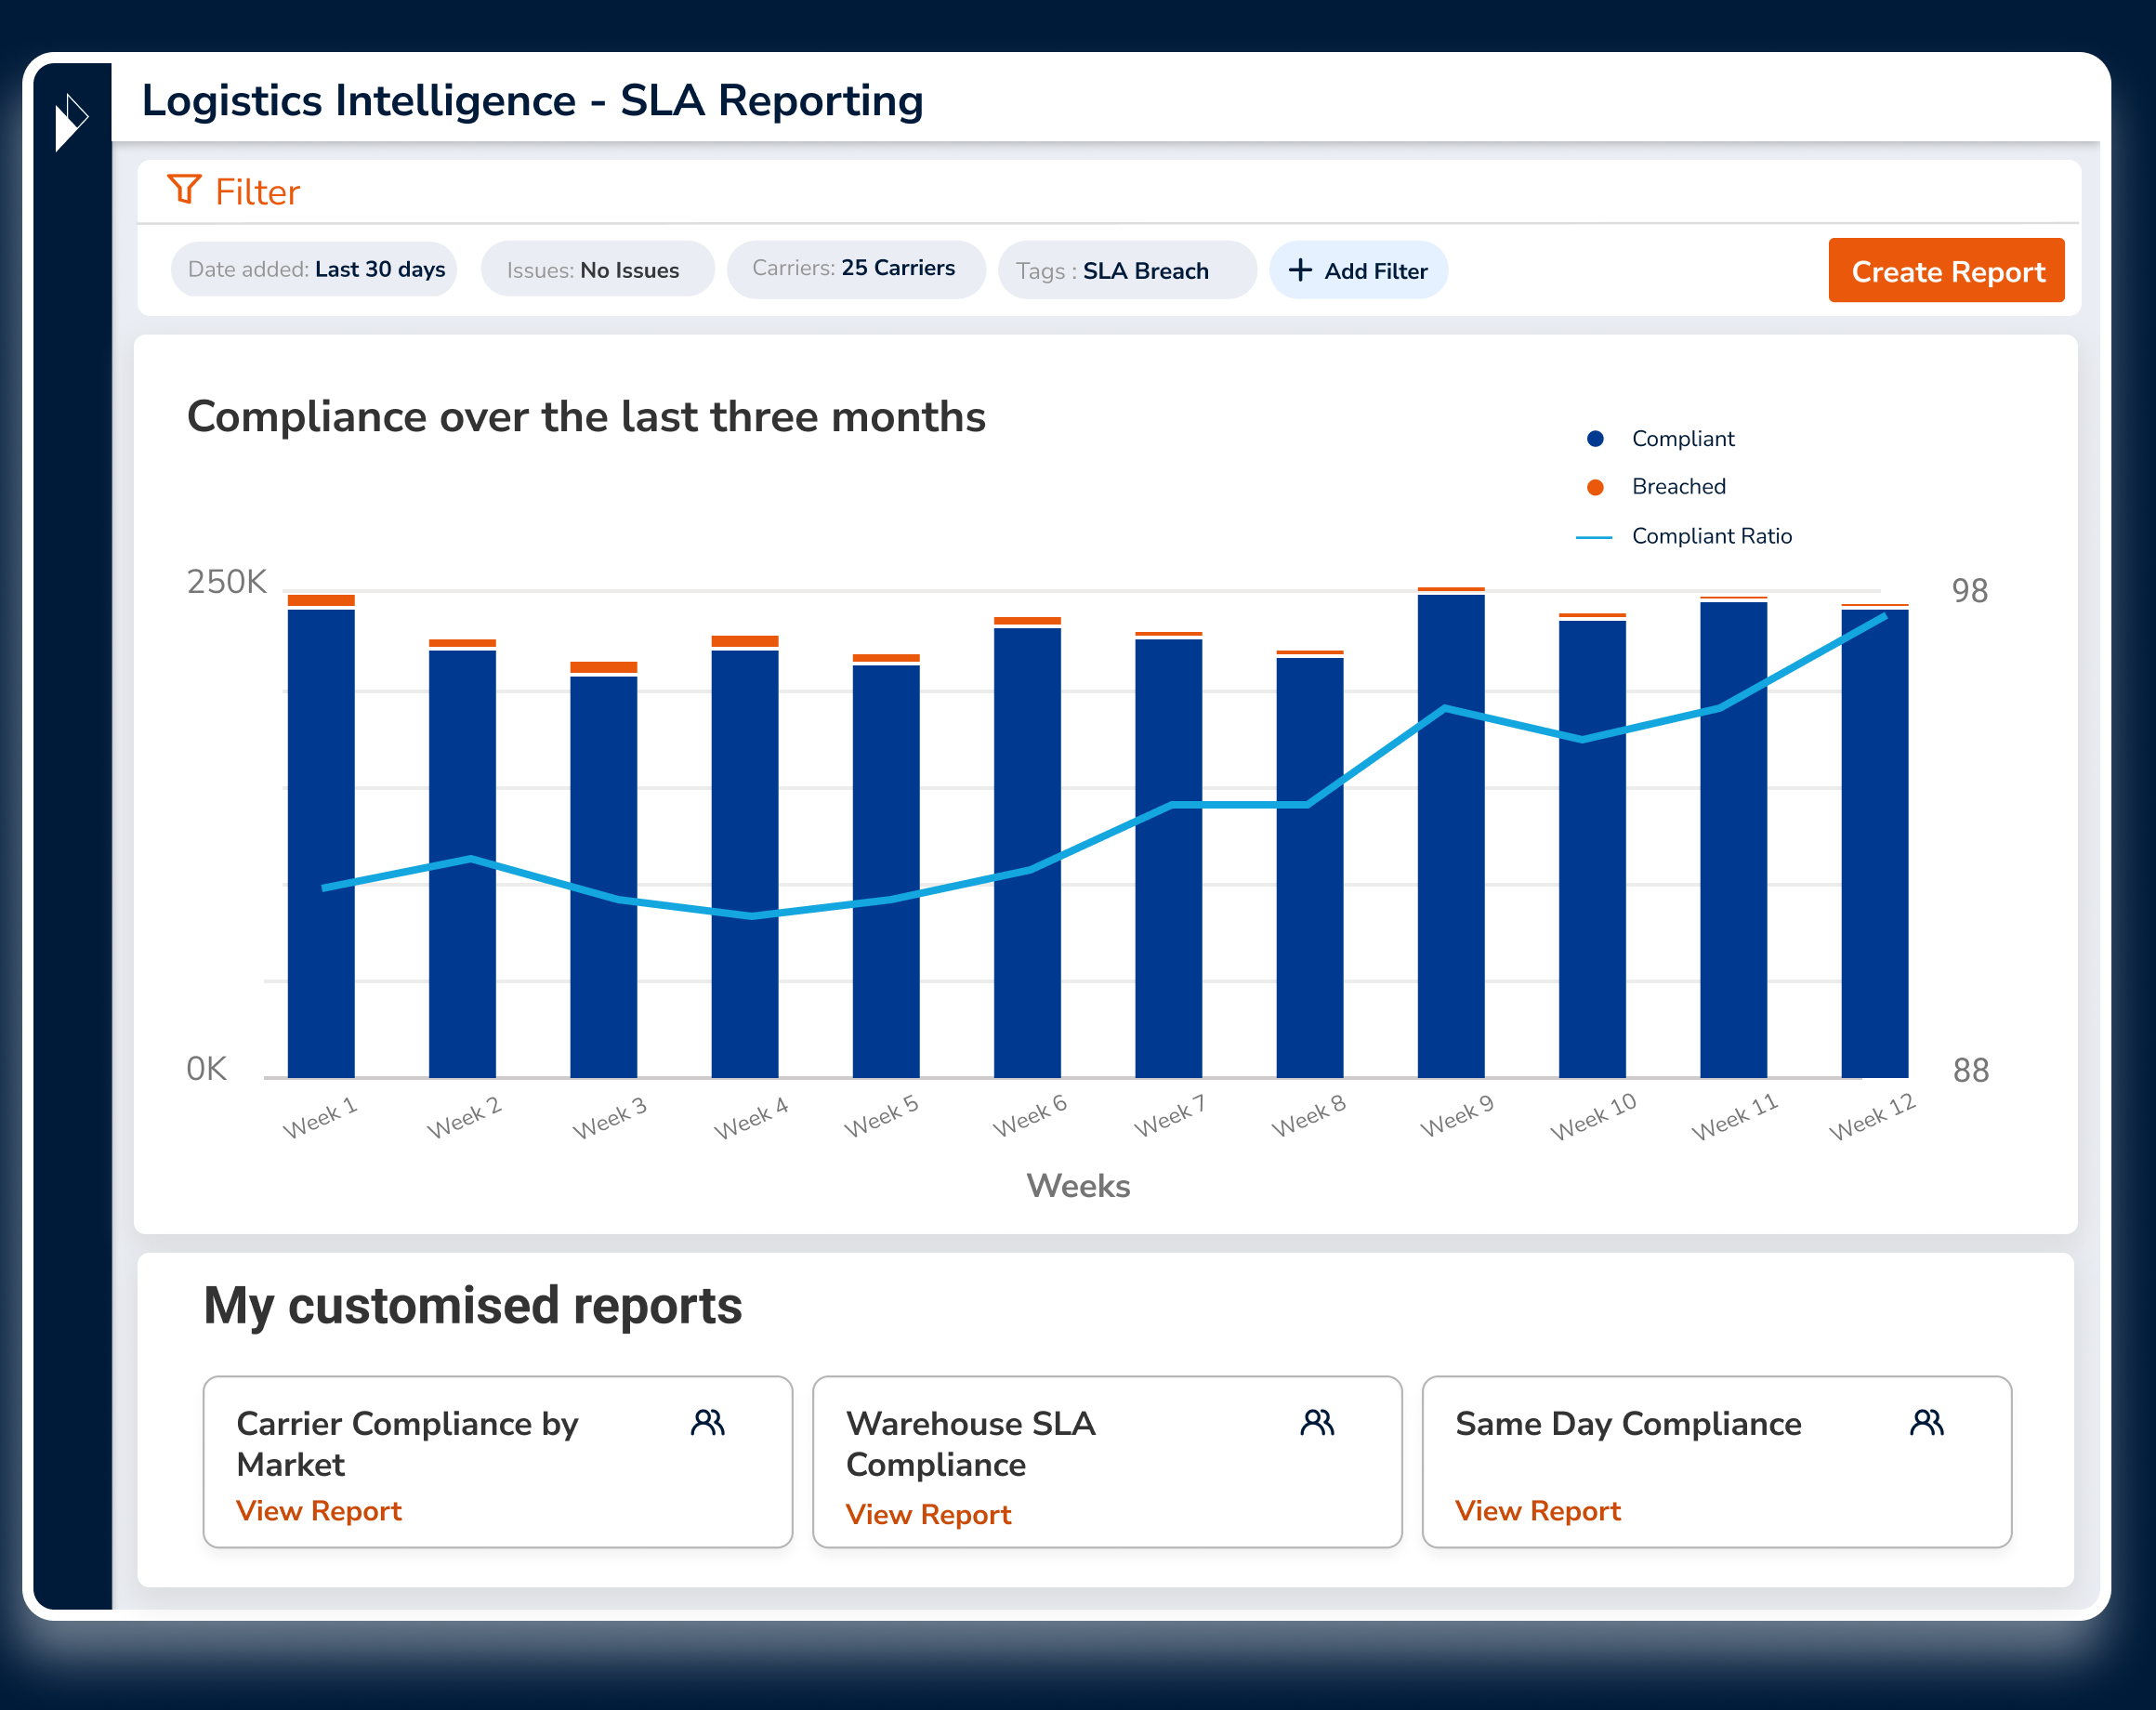 Parcel Perform logistics intelligence page for SLA reporting showing a bar graph of compliance over time